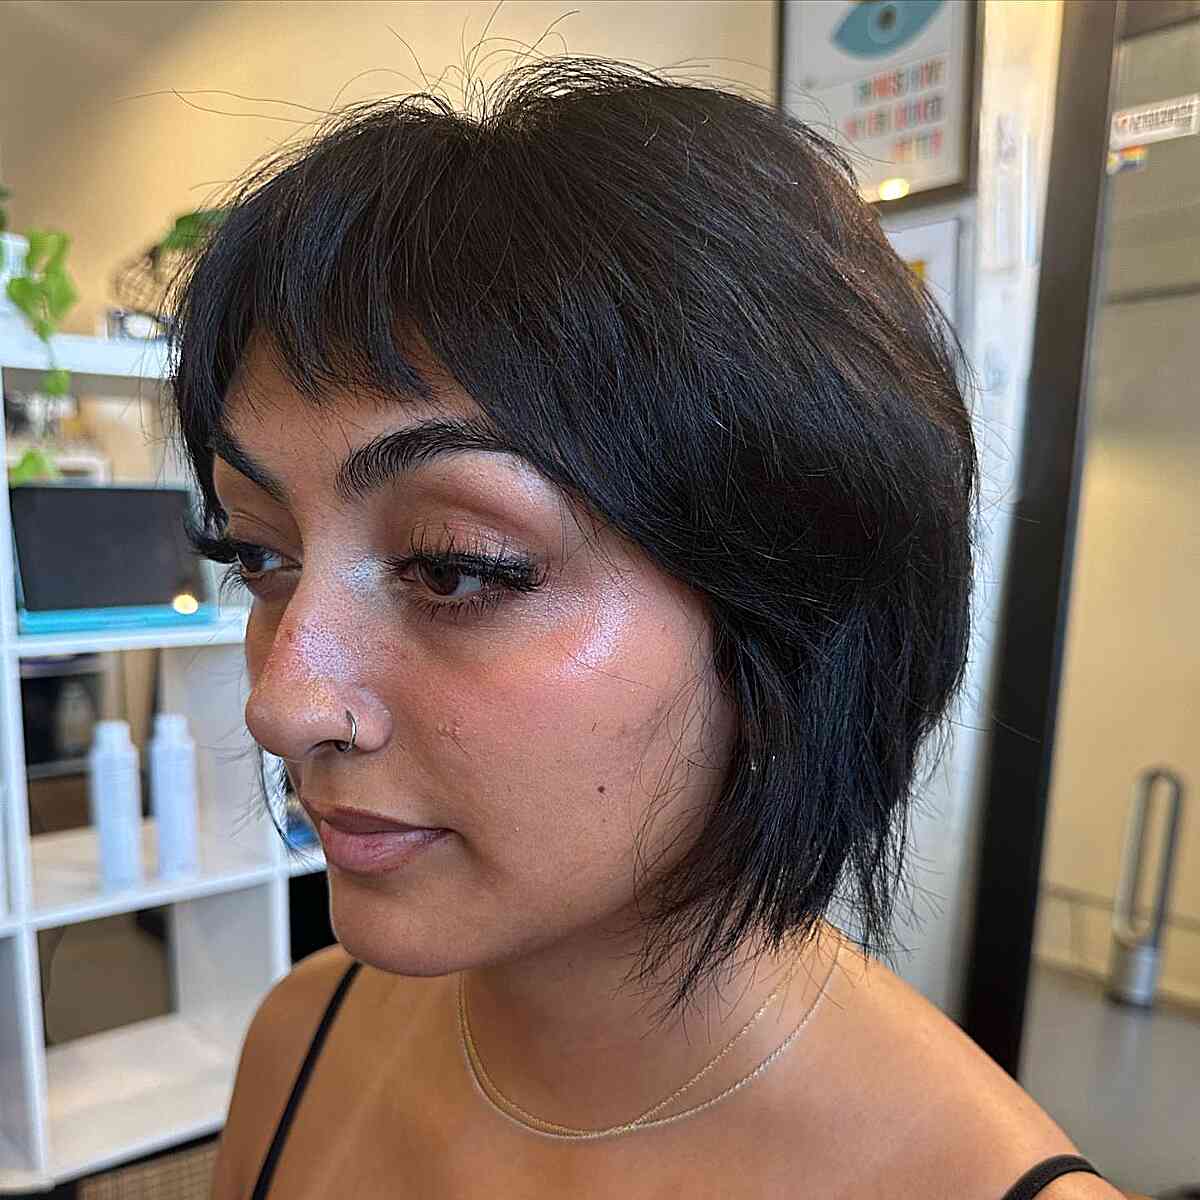 Chin-Length Short Shaggy Thick Hair with Micro Fringe